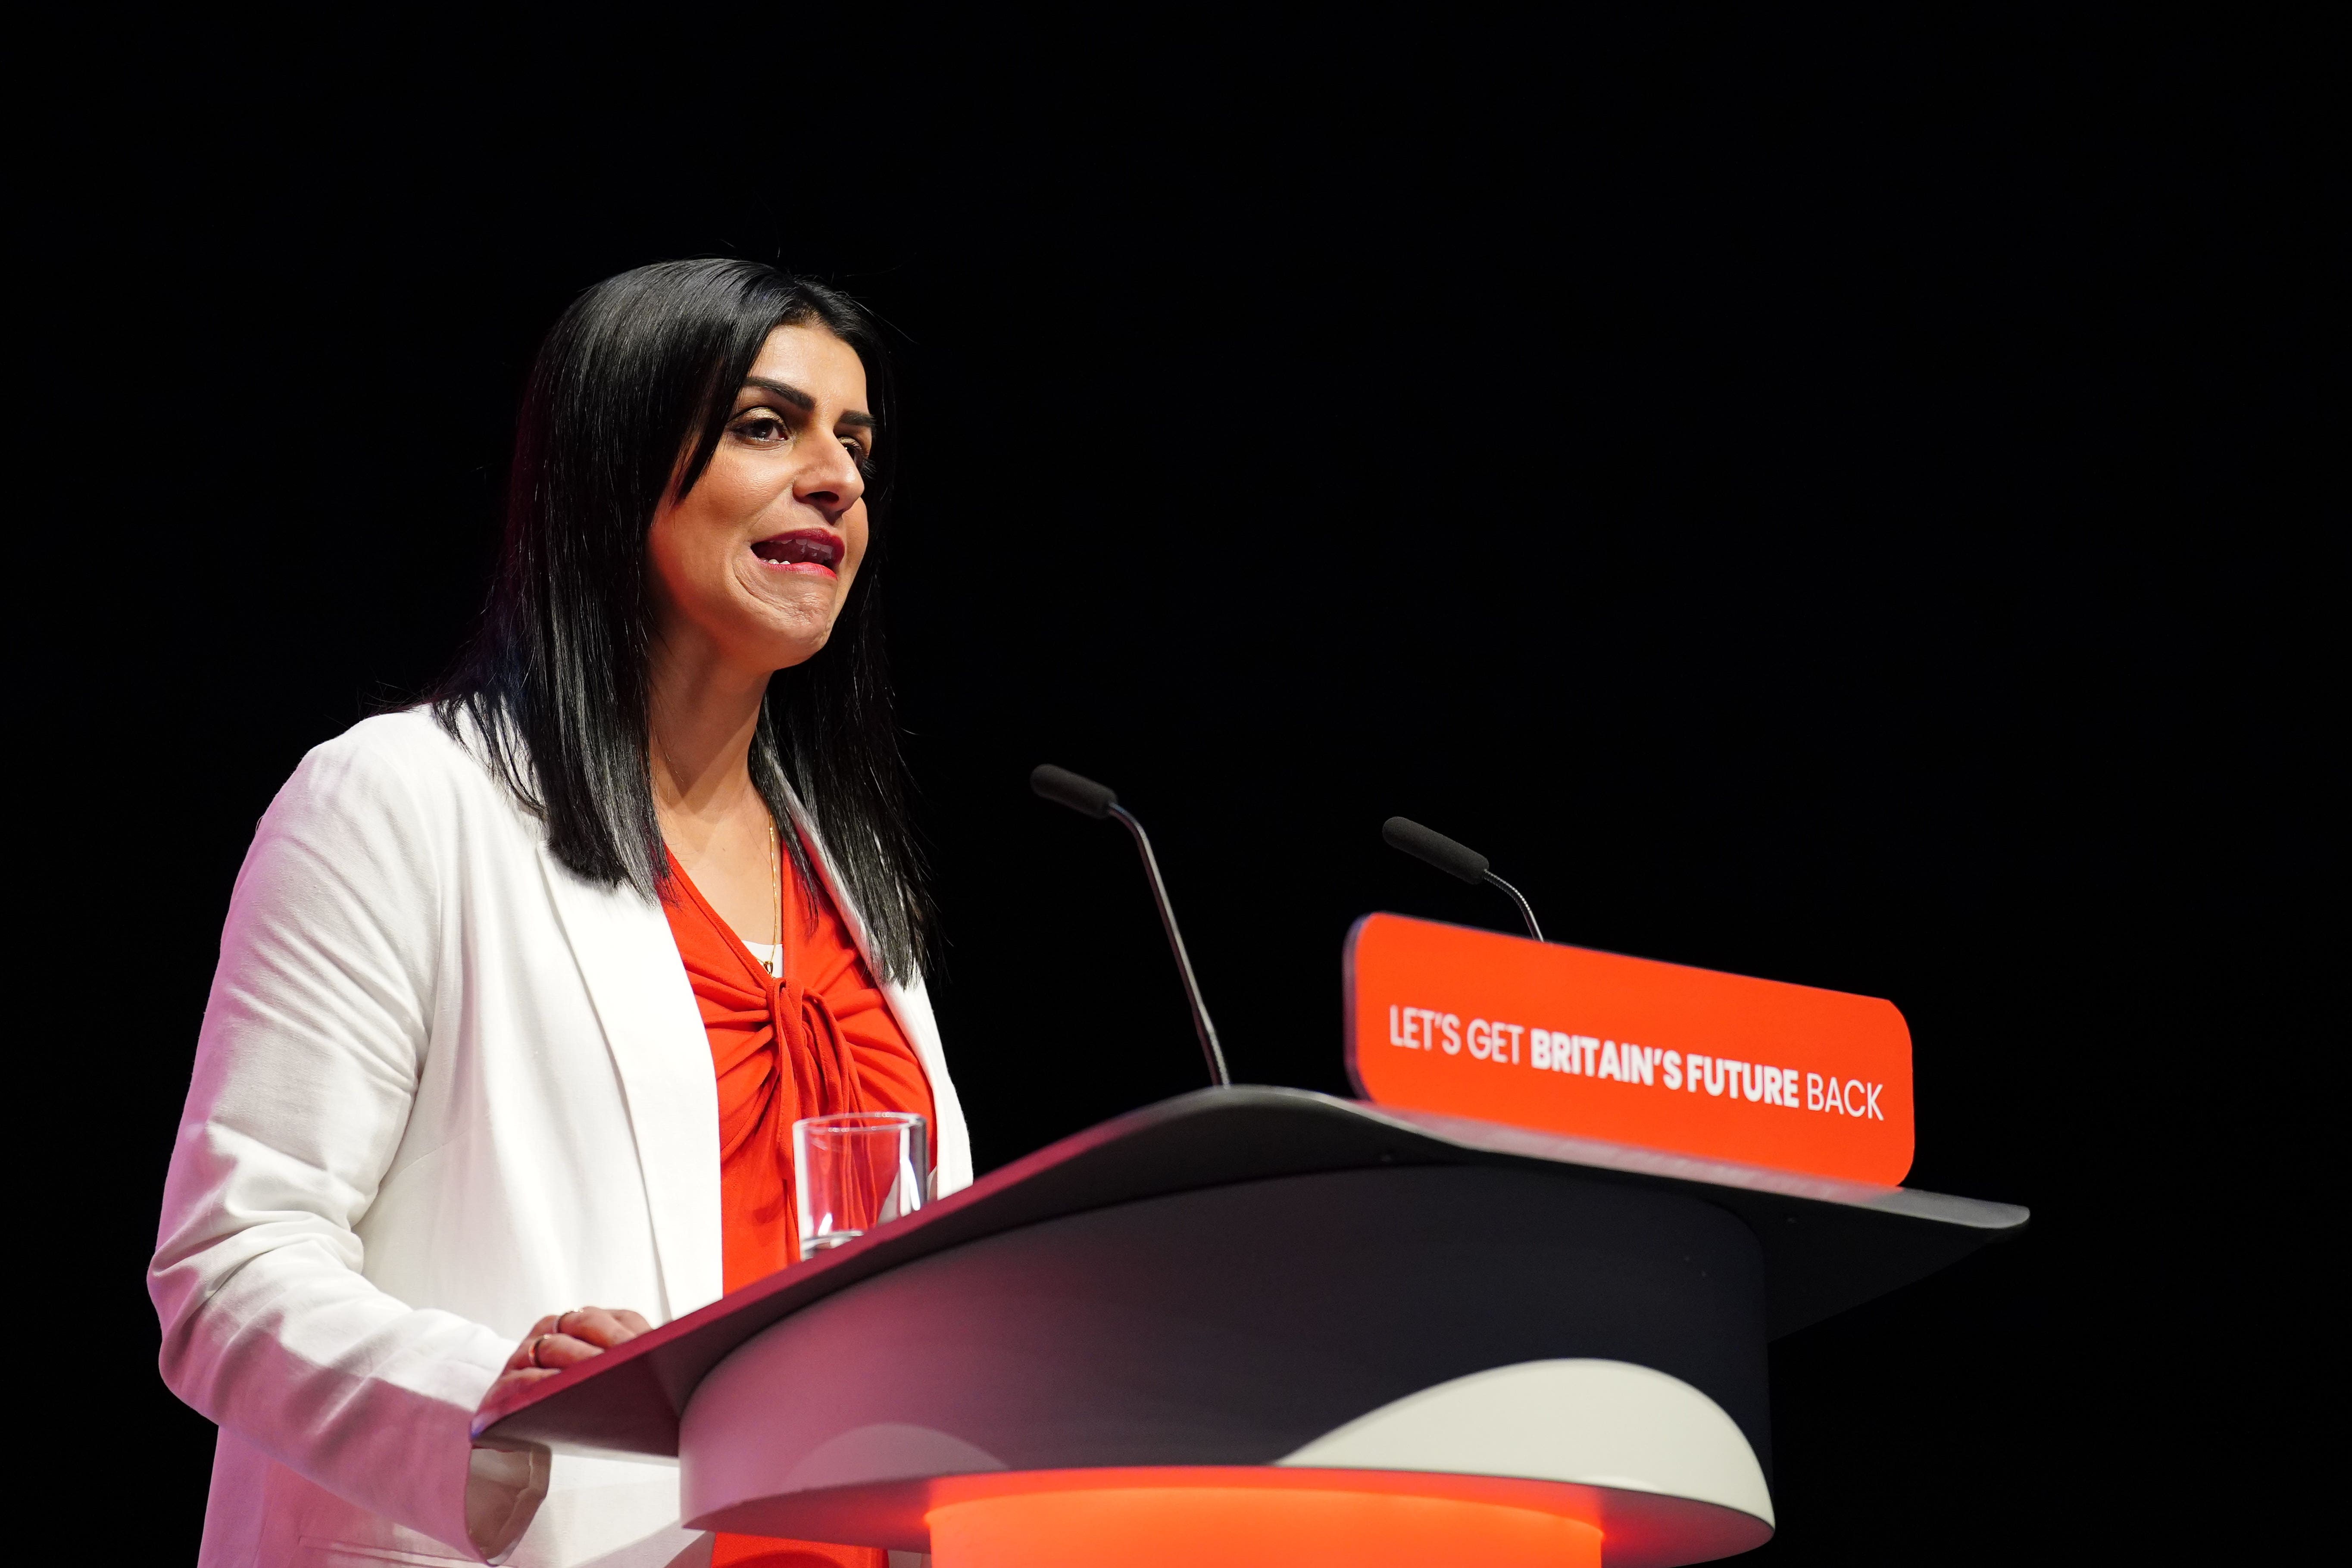 Shadow justice secretary Shabana Mahmood accused the Government of falling behind on its pledge to create 20,000 more prison places by 2025 (Peter Byrne/PA)